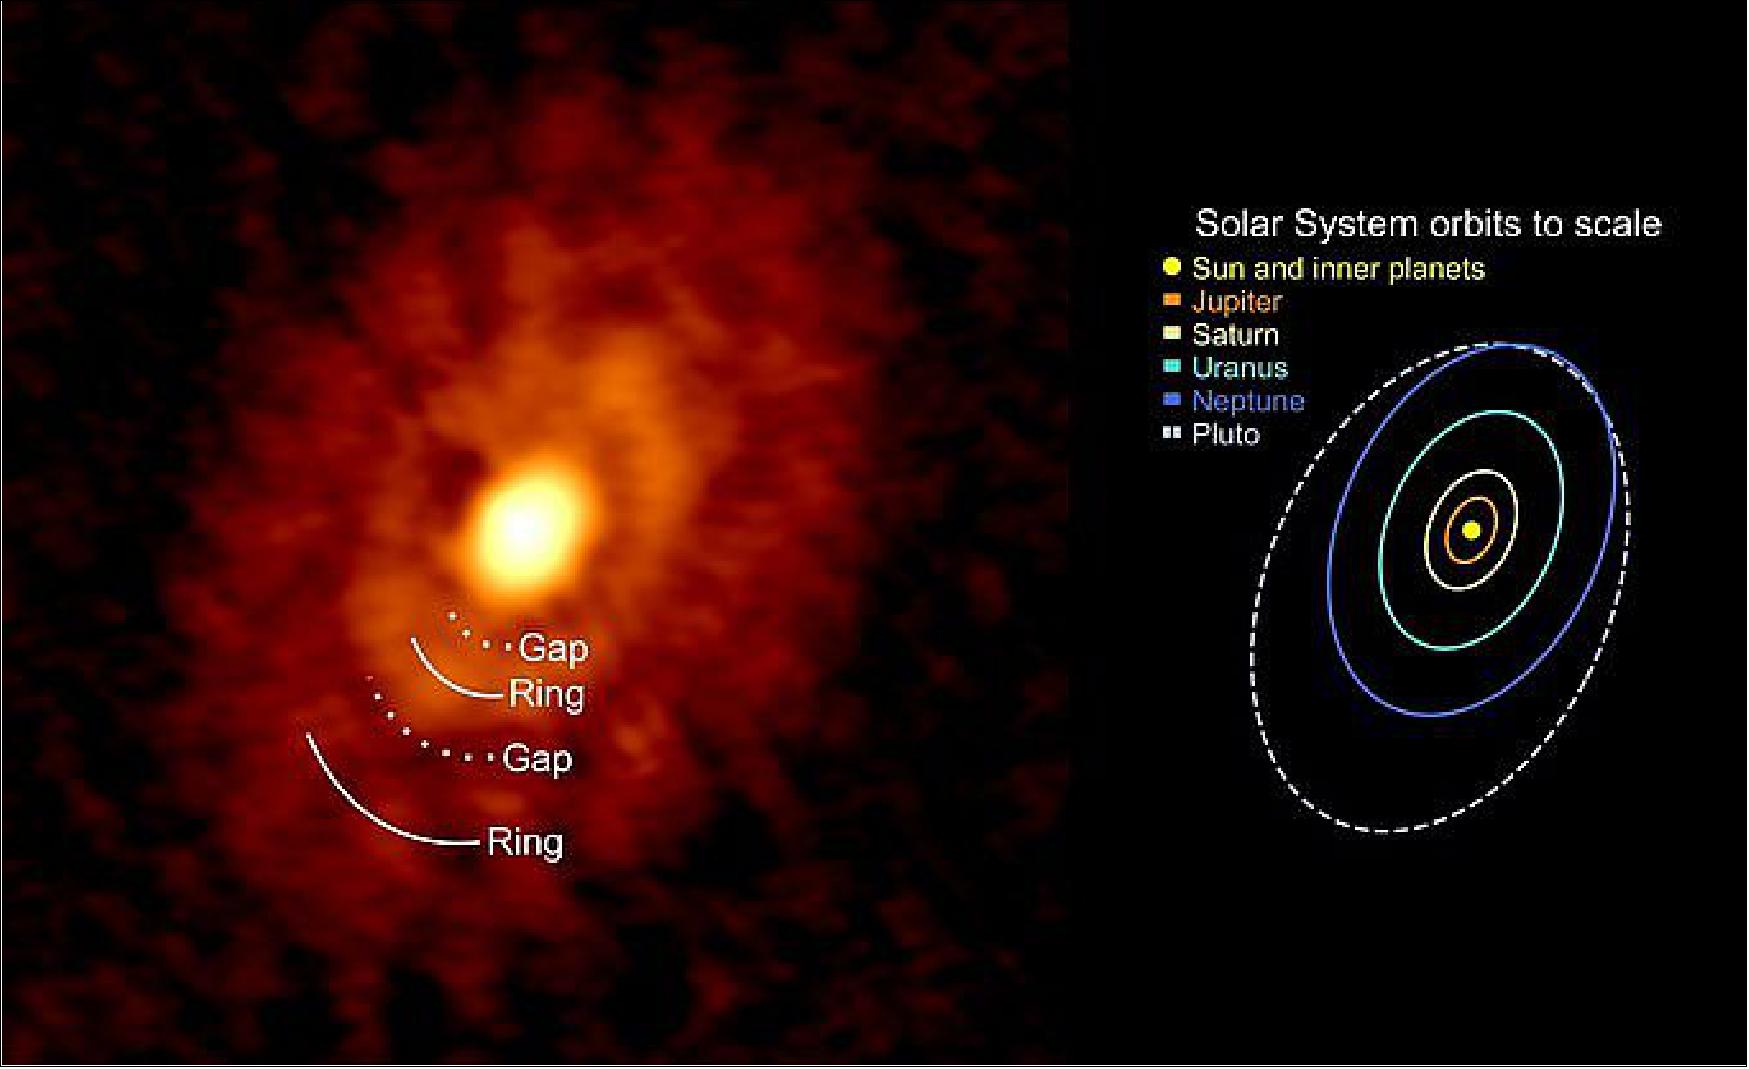 Figure 51: The rings and gaps in the IRS 63 dust disk compared to a sketch of orbits in our own Solar System at the same scale ... [more], image credit: MPE, D. Segura-Cox)